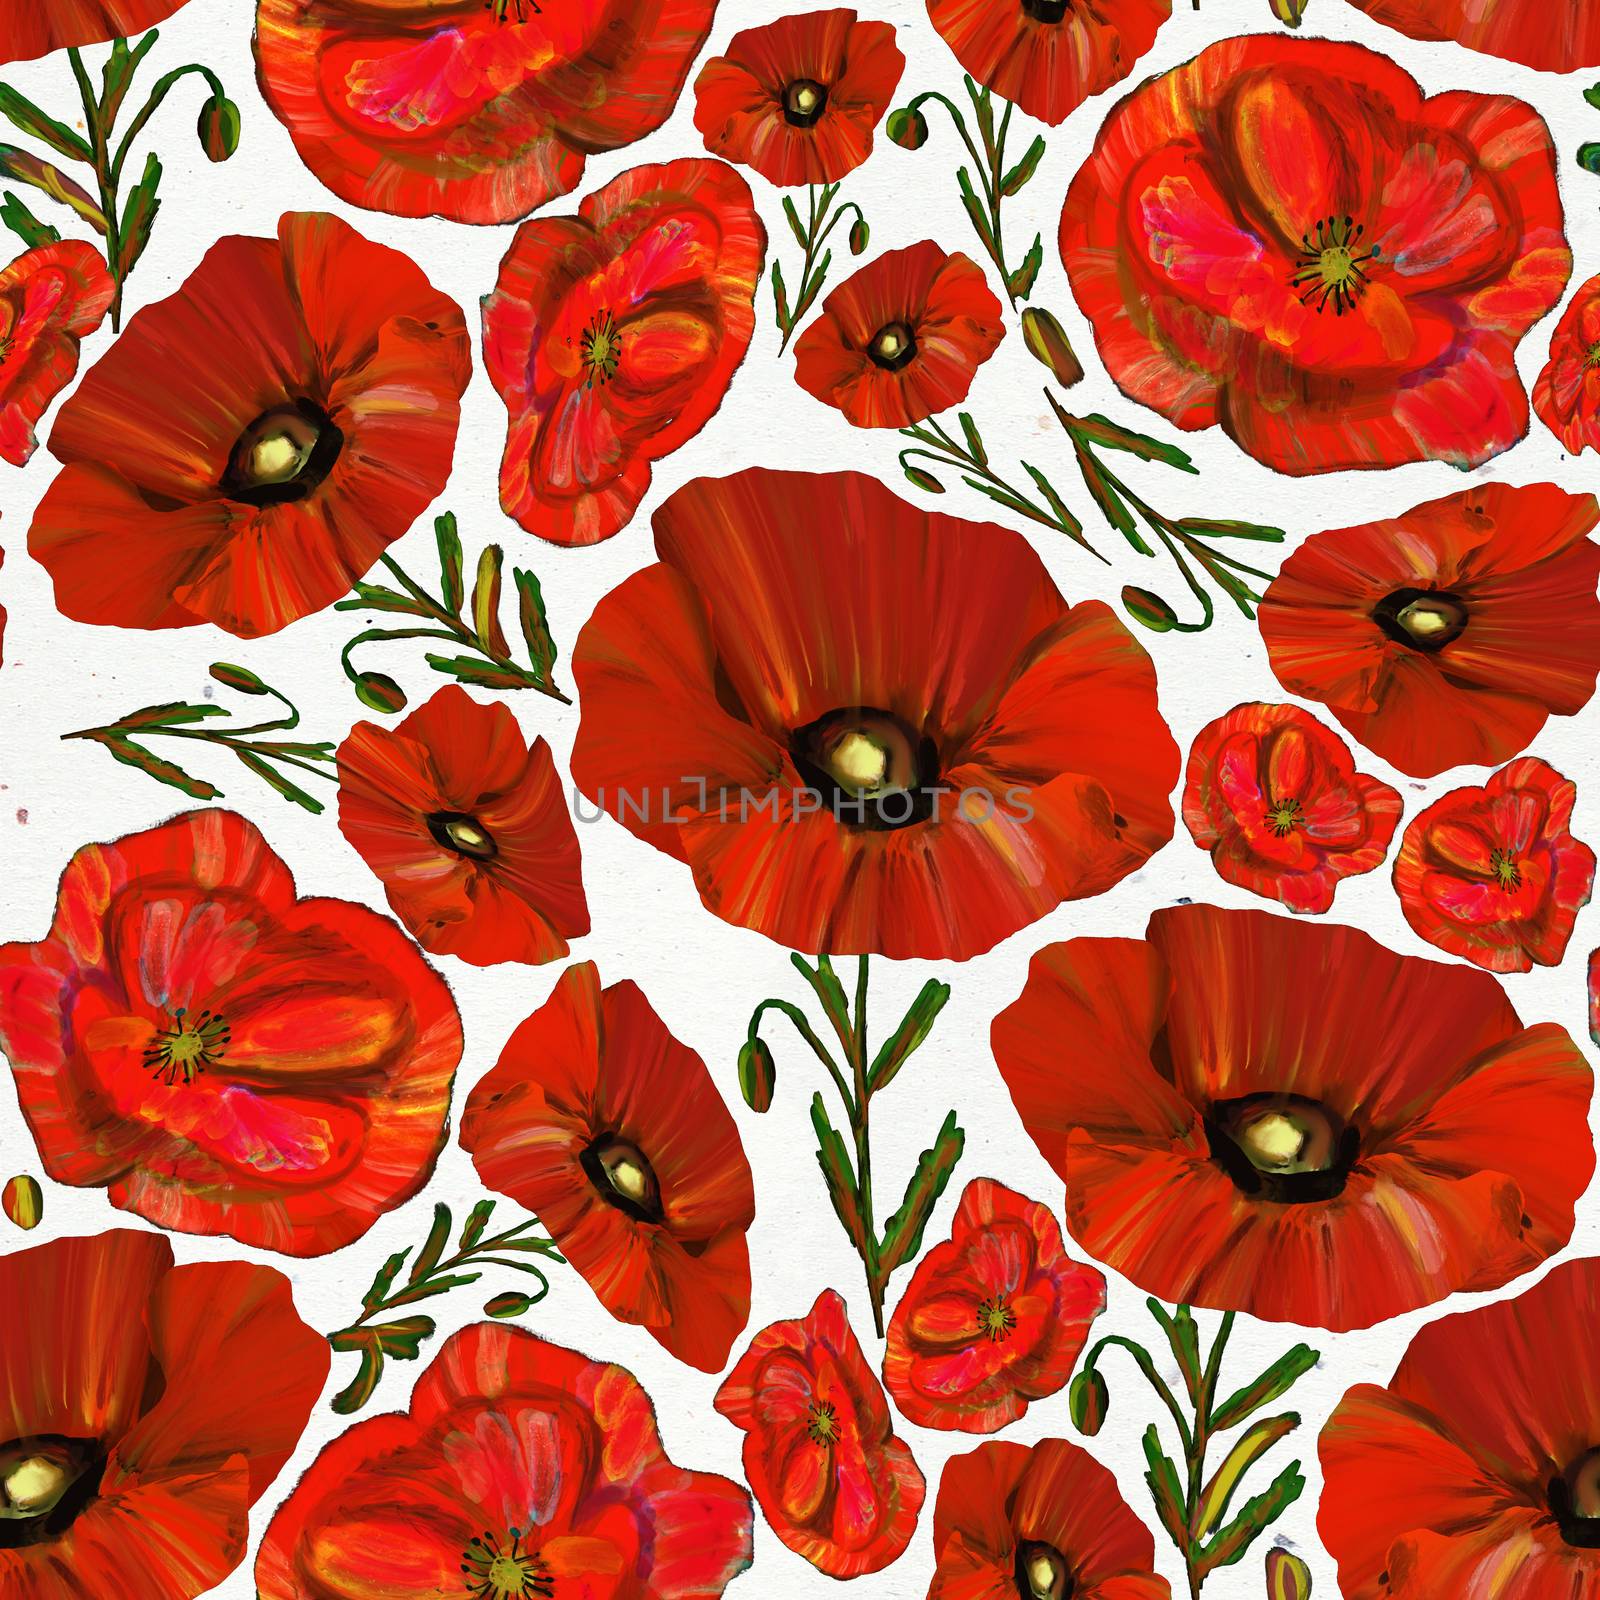 Red poppy seamless pattern on white background. Wildflower background. Beautiful ornamental texture with flowers. Endless design illustration.